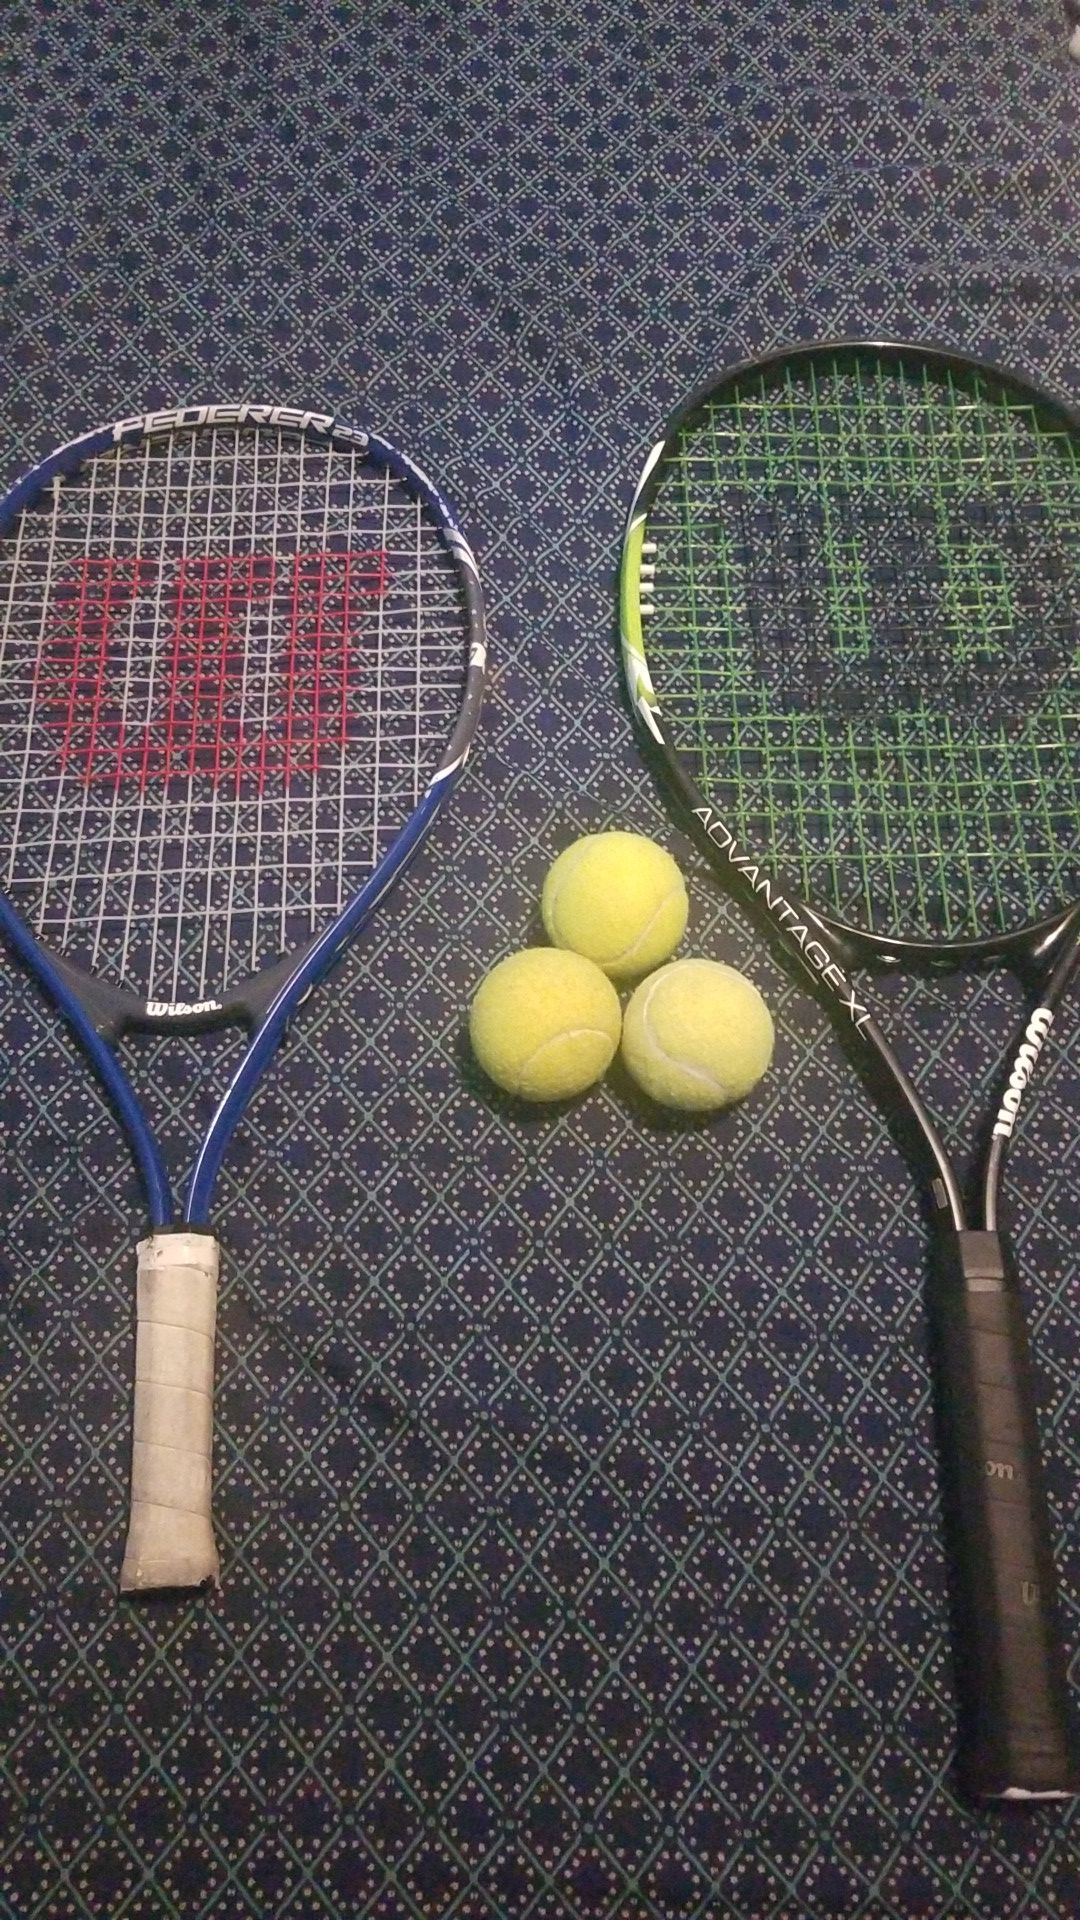 Used tennis rackets and 3 tennis balls for sale